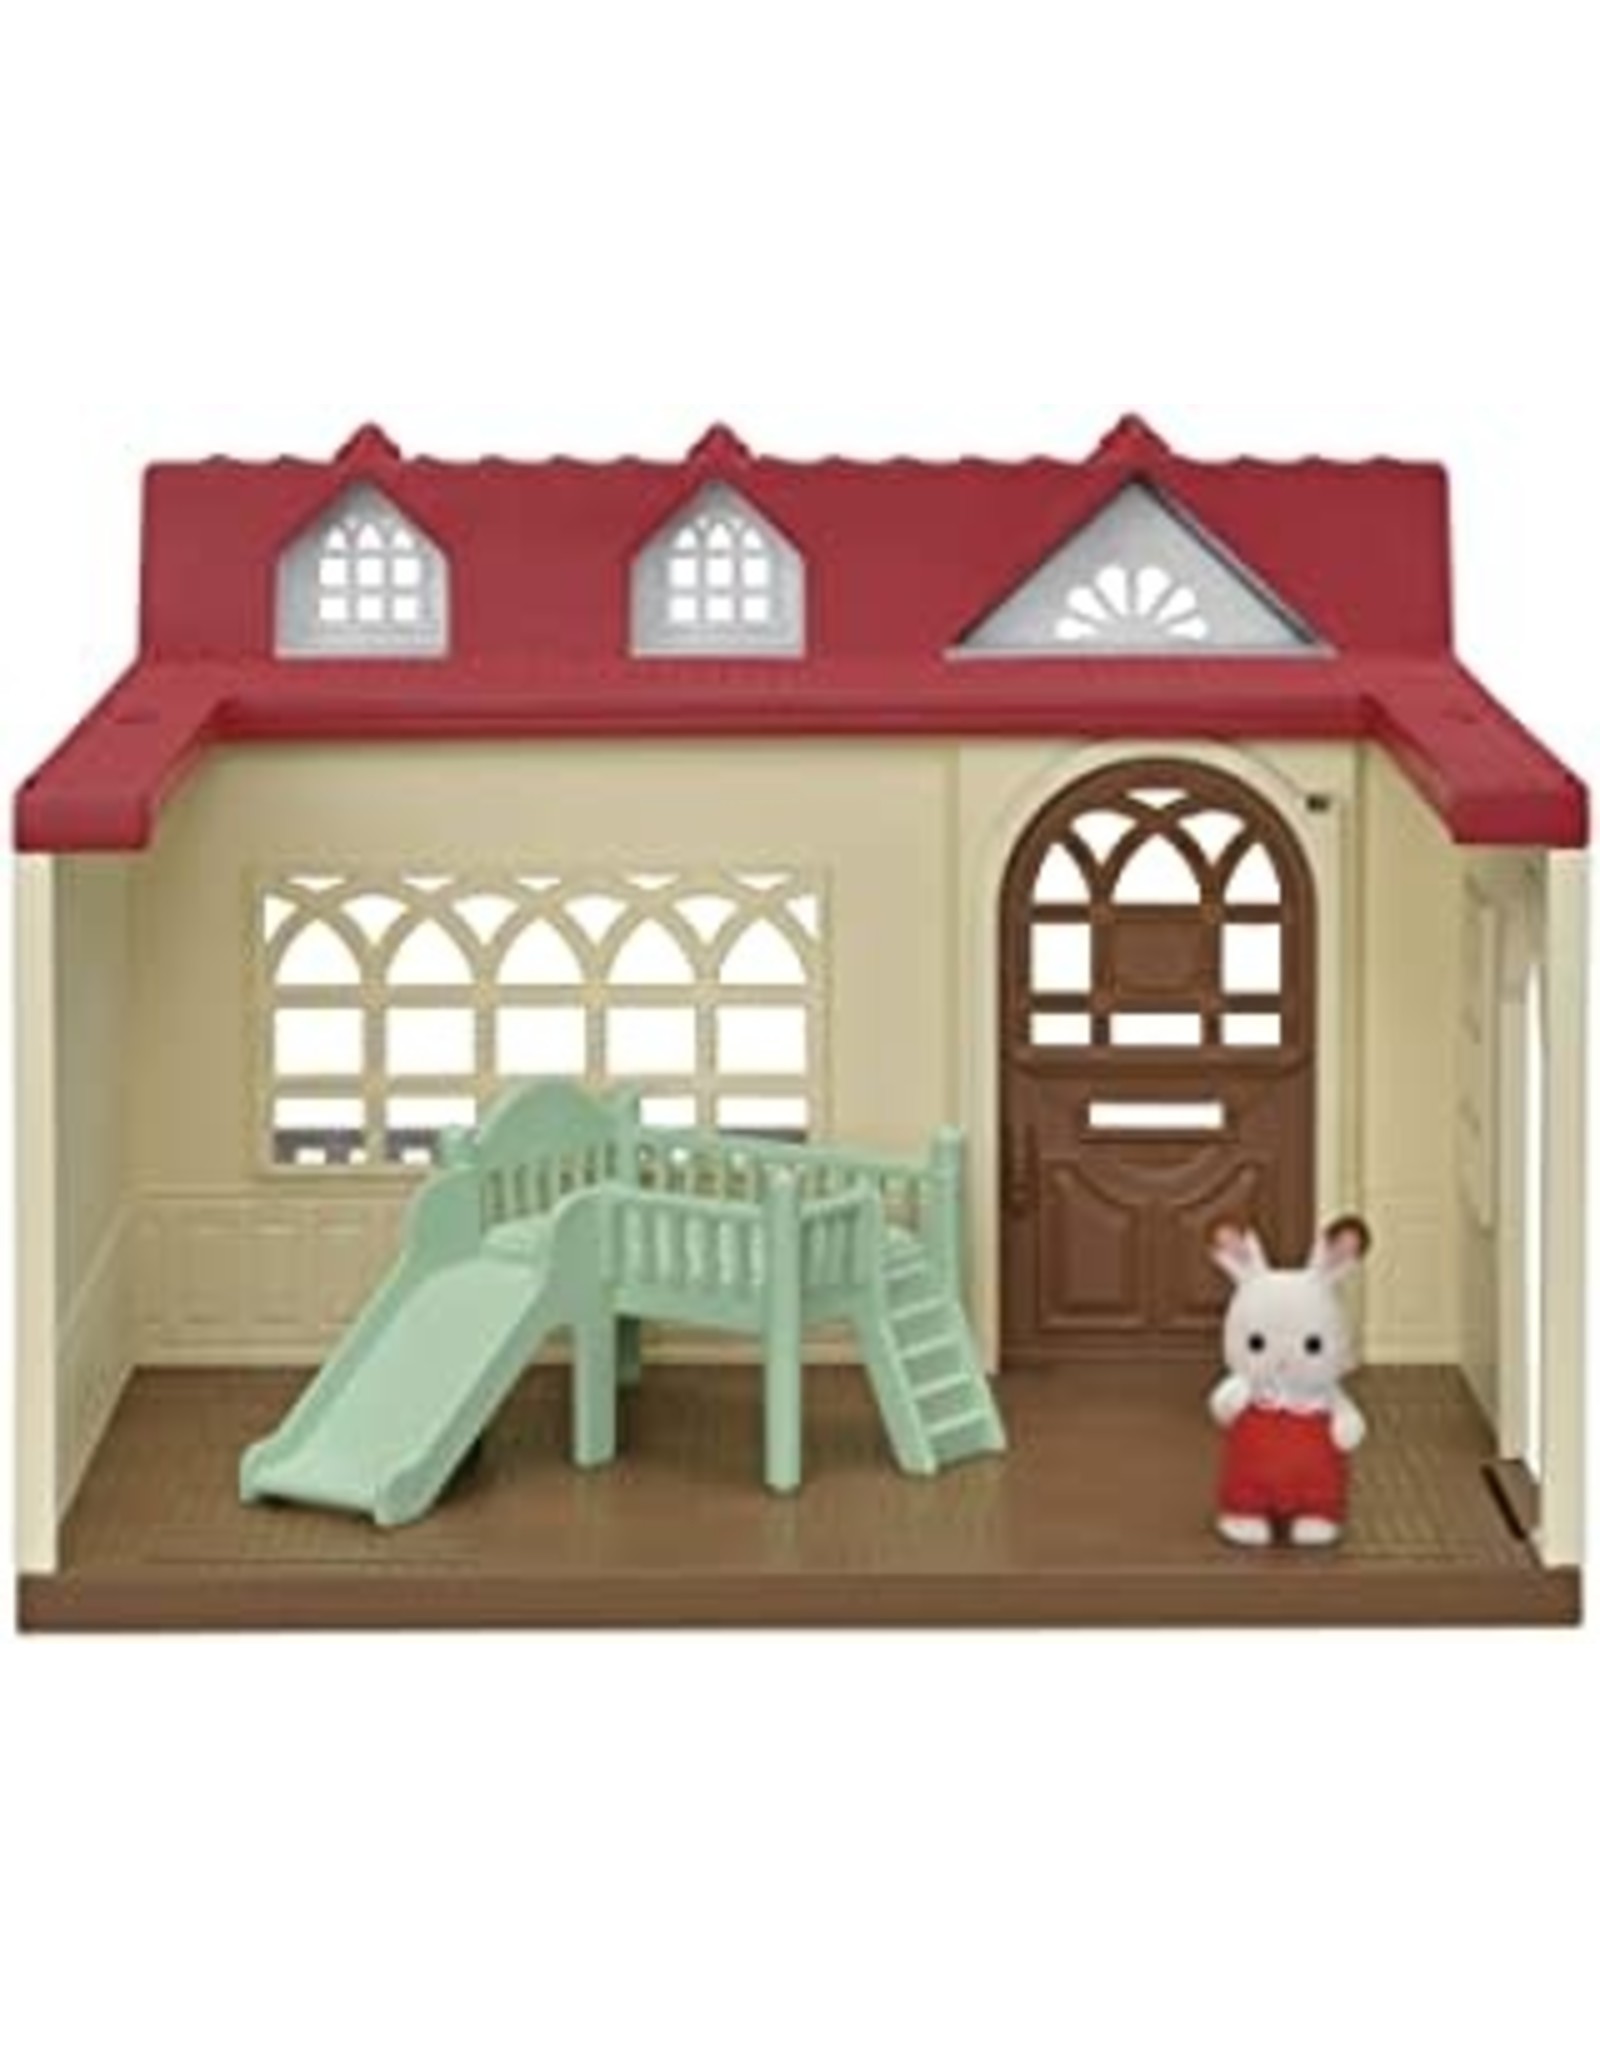 Calico Critters Calico Critters Sweet Raspberry Home